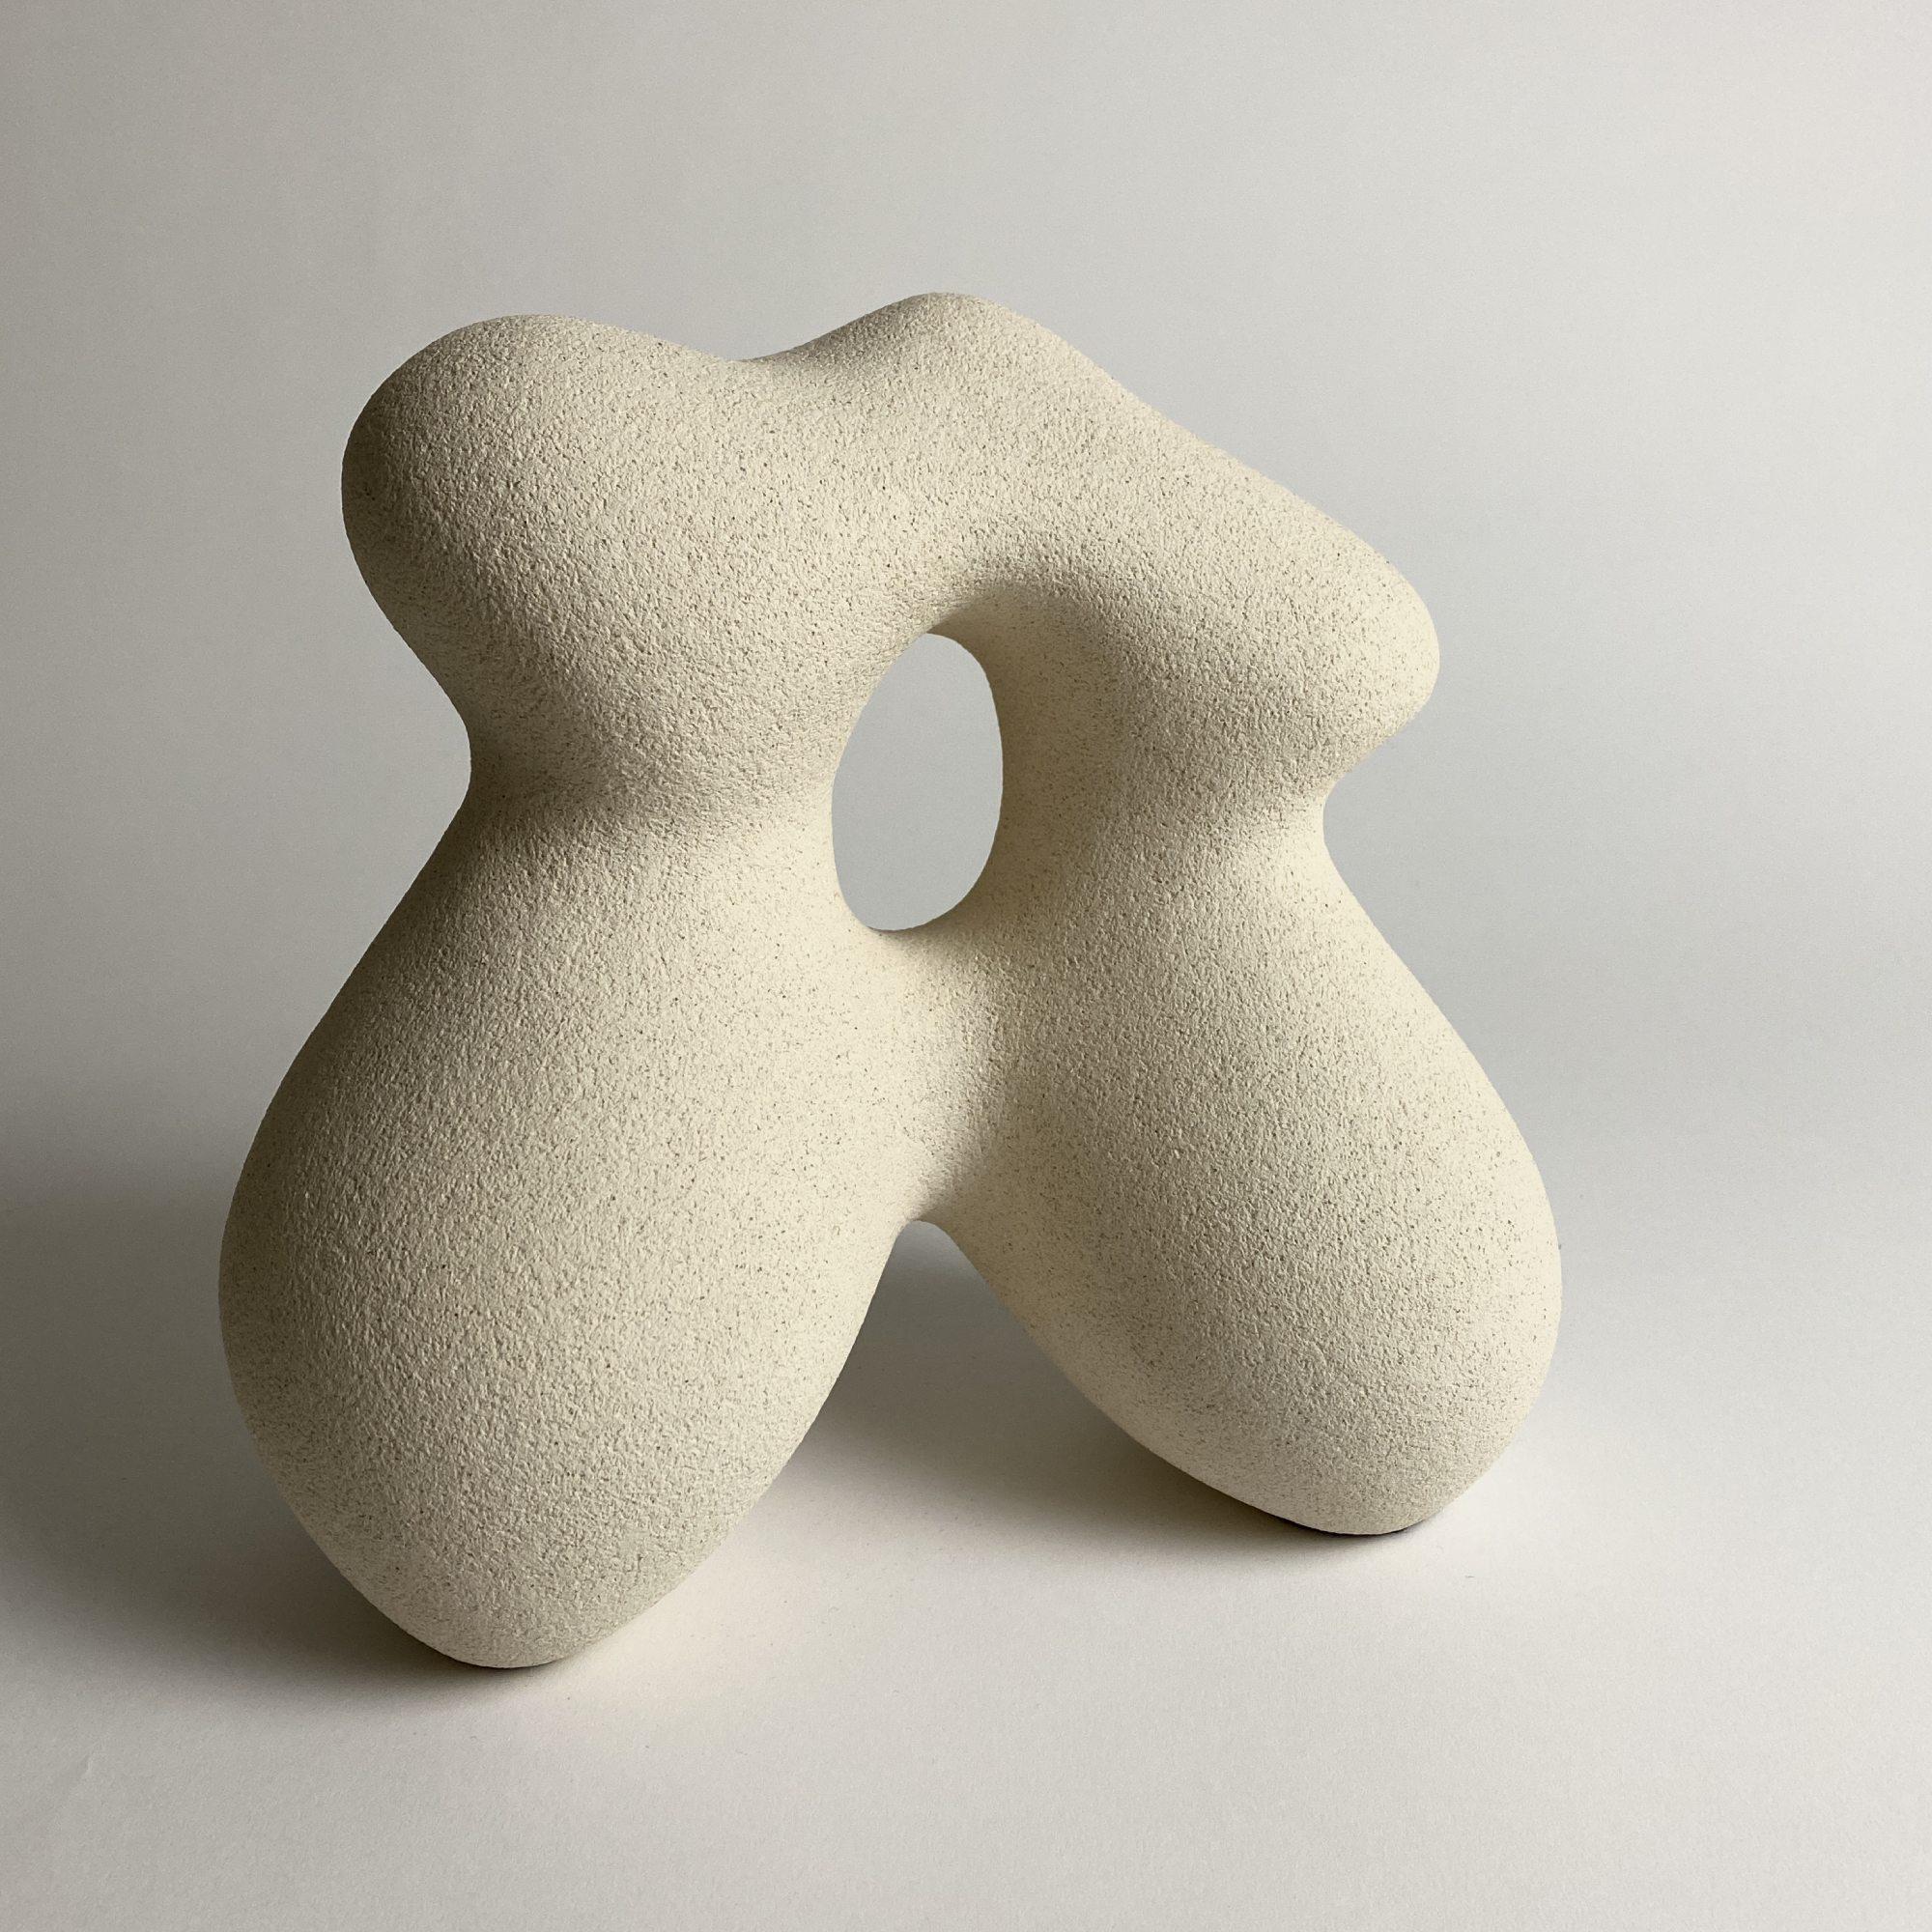 Sandstone Héloïse hand sculpted by Hermine Bourdin 
Unique
Dimensions: H 24 x W 27 cm
Materials: Sandstone

In my work I’m trying to represent women who are free, who are generous, voluptuous, sensual, strong, thriving and protective.

To me,